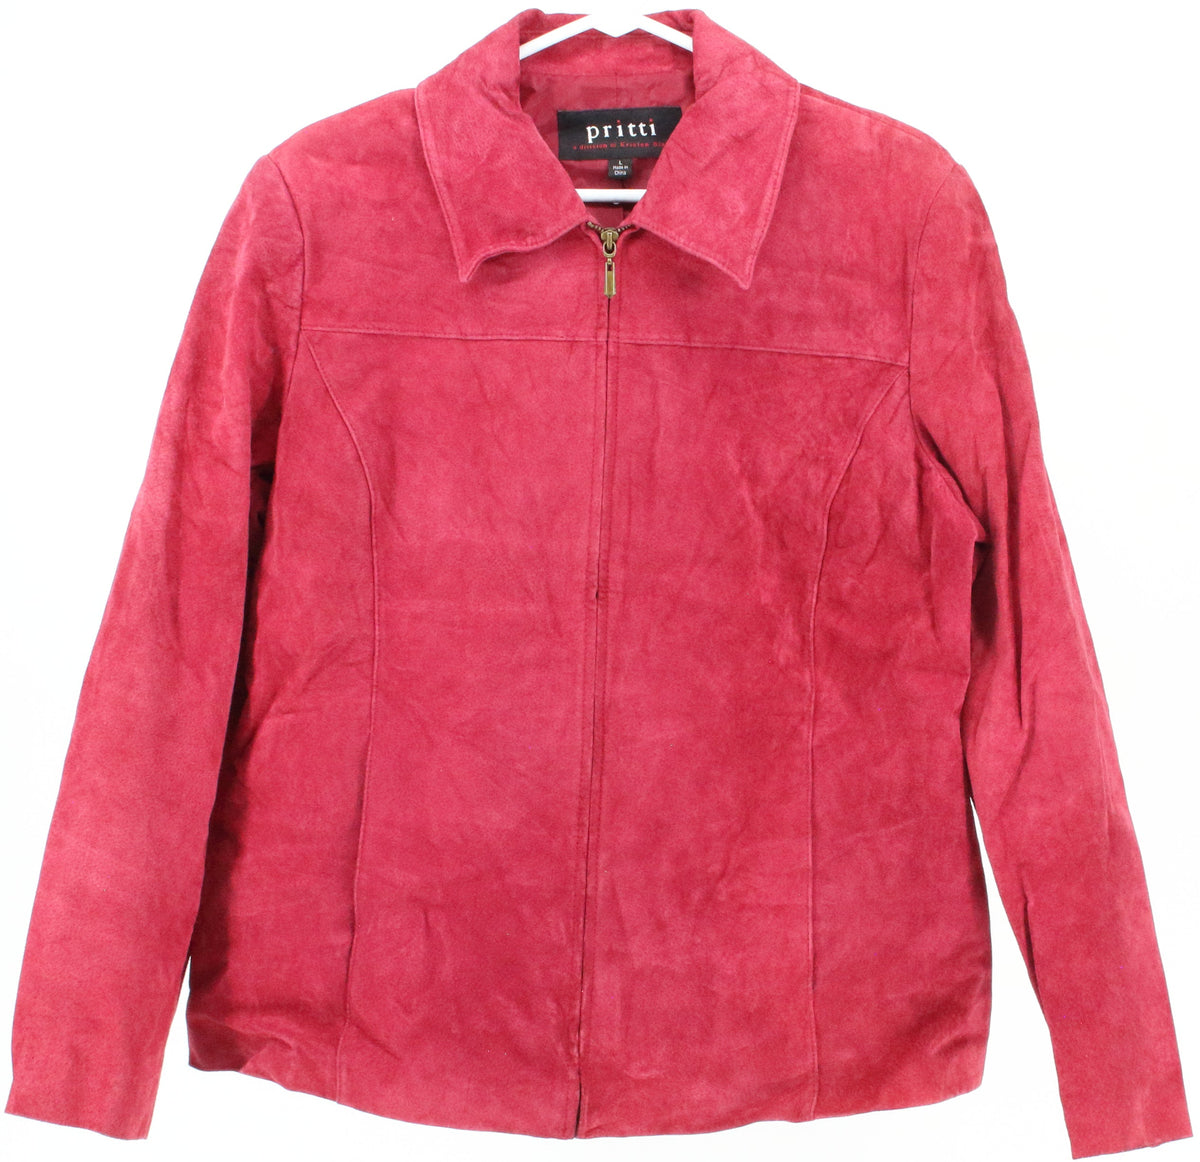 Pritti Red Leather Jacket